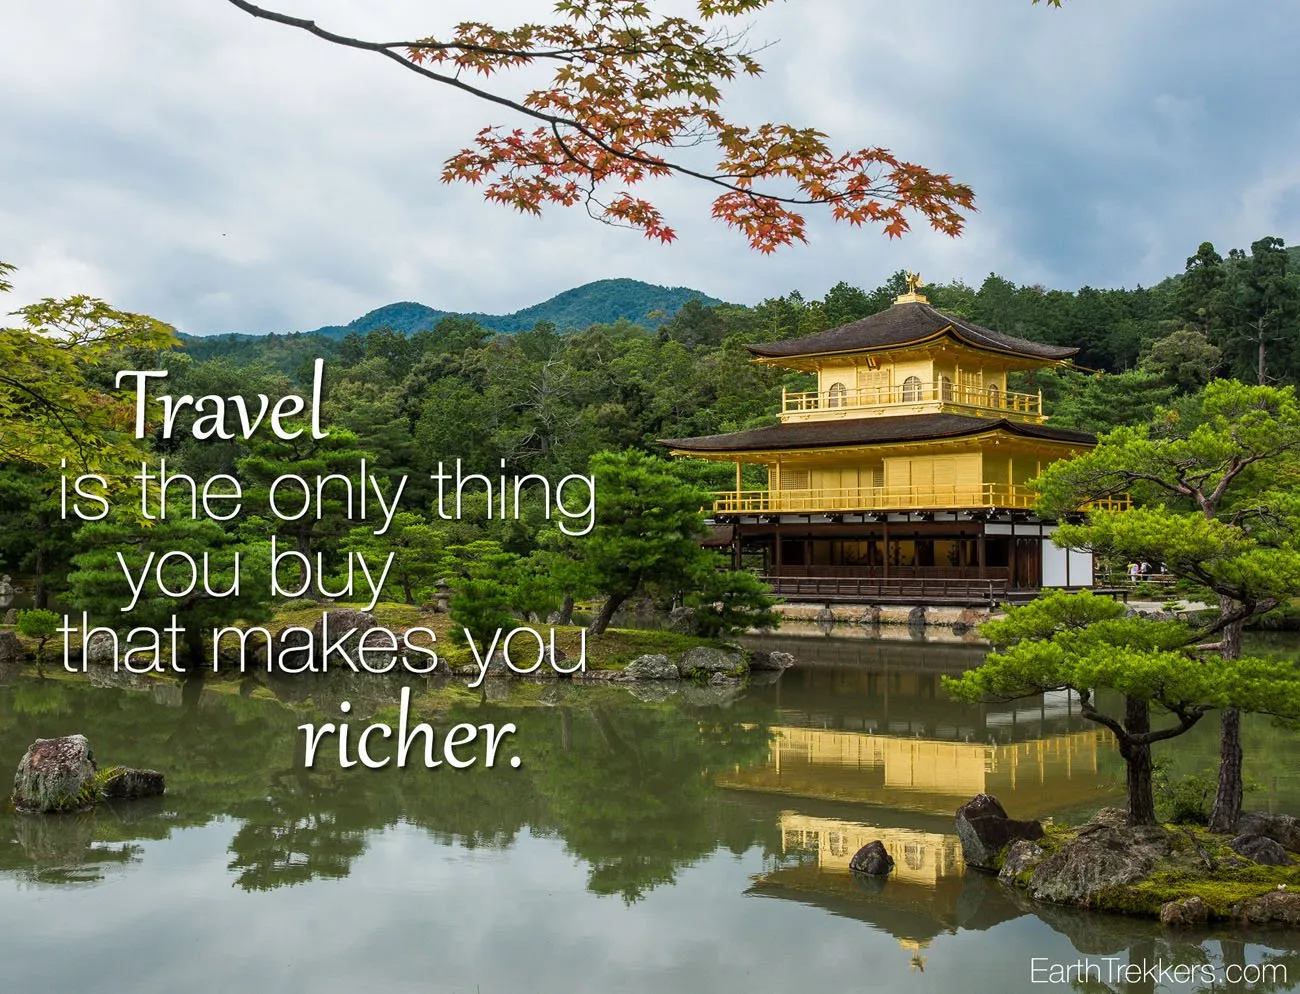 Travel makes you richer